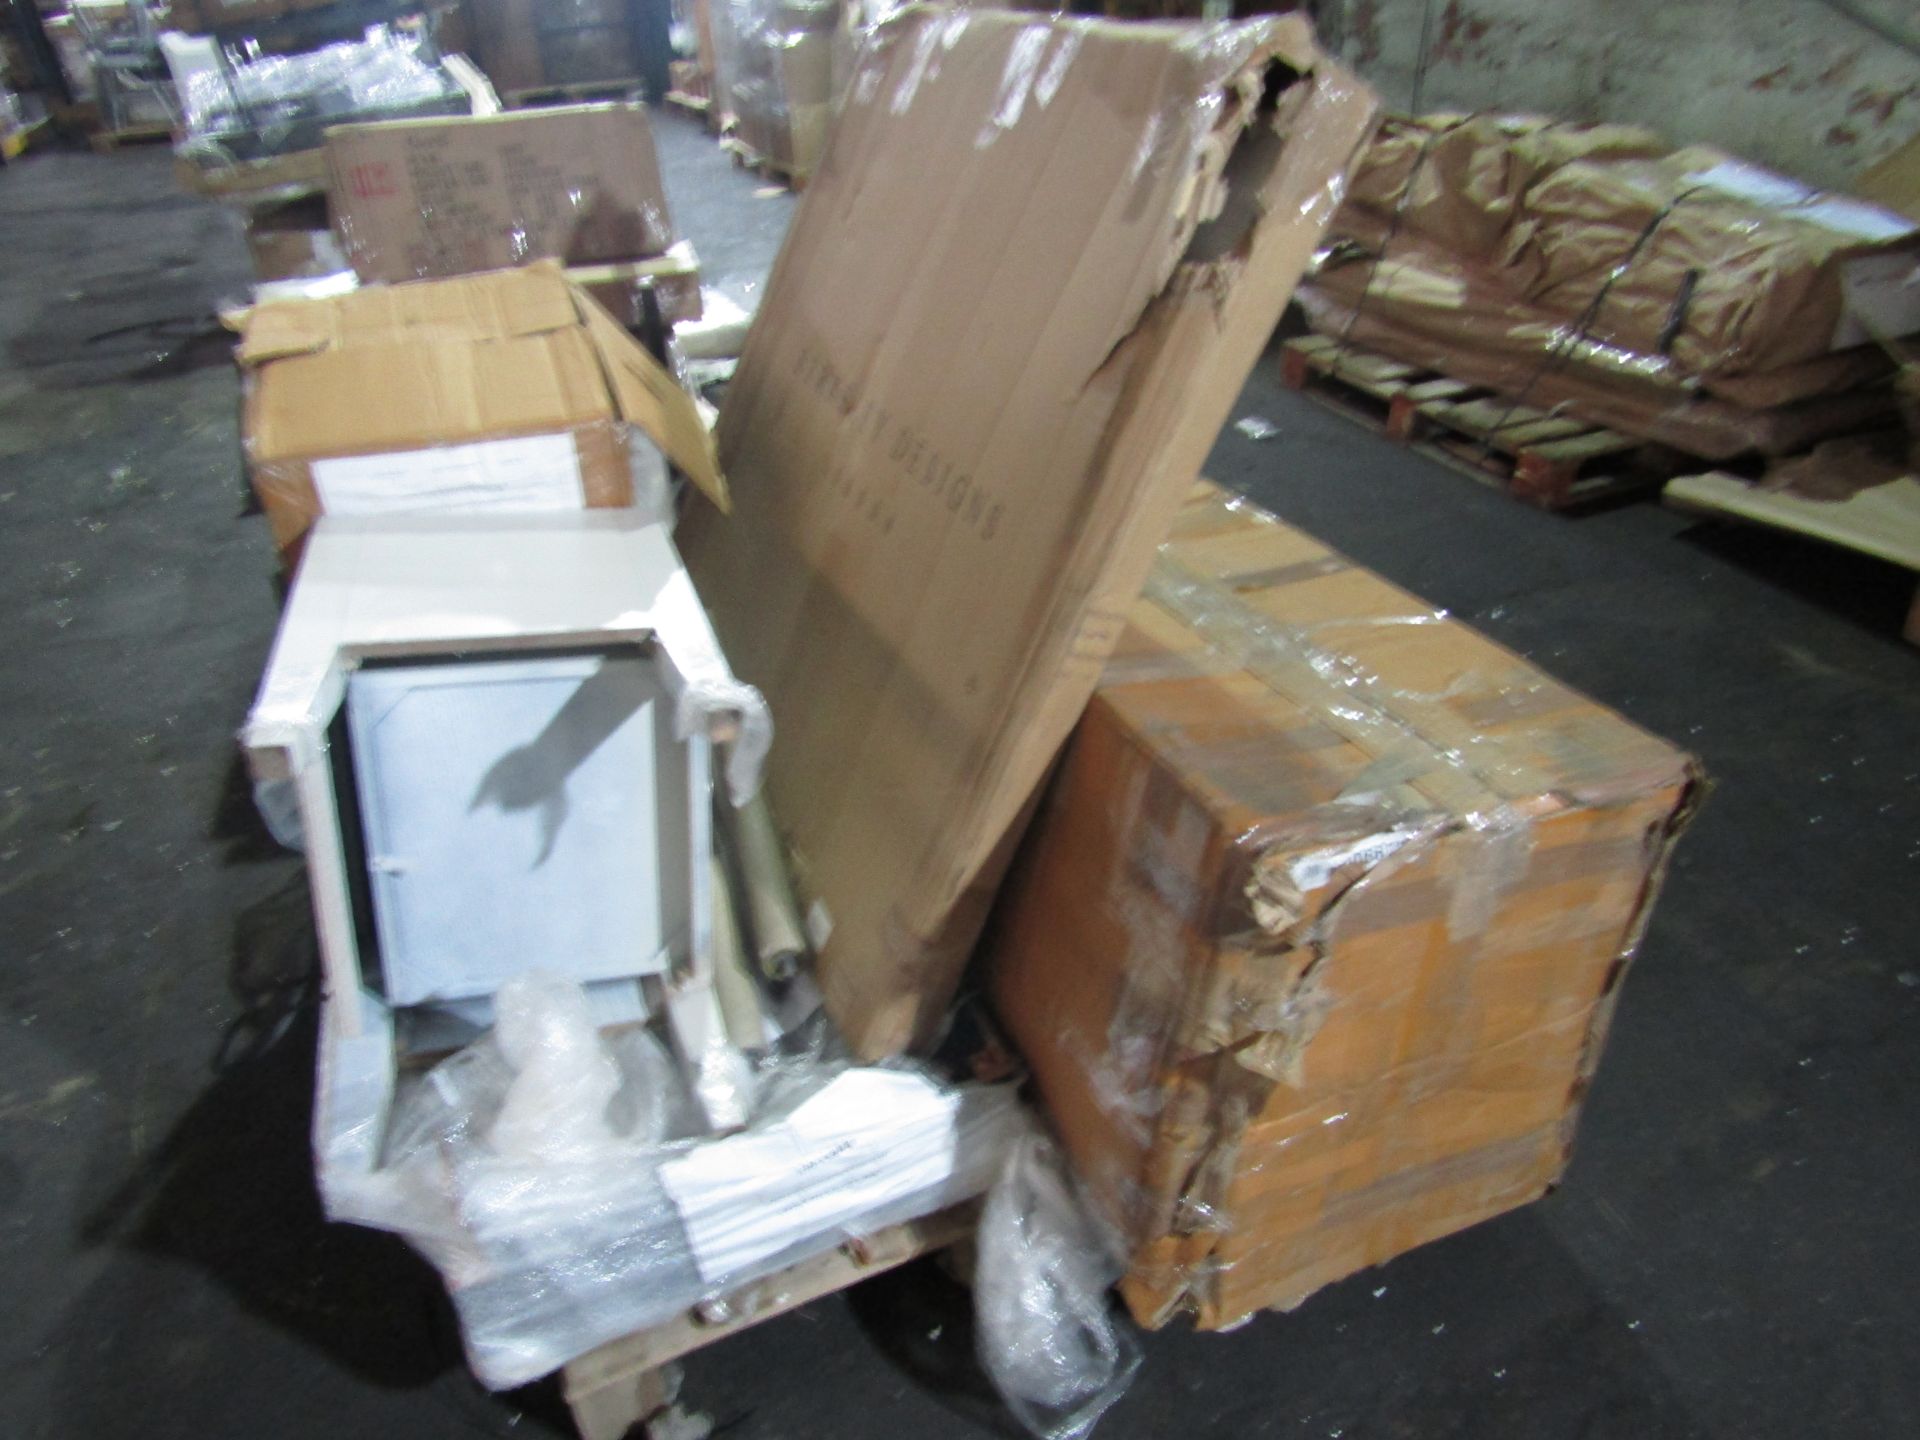 5x pieces of damaged returns from Moot Group including art, side board, table, bedside cabinet and